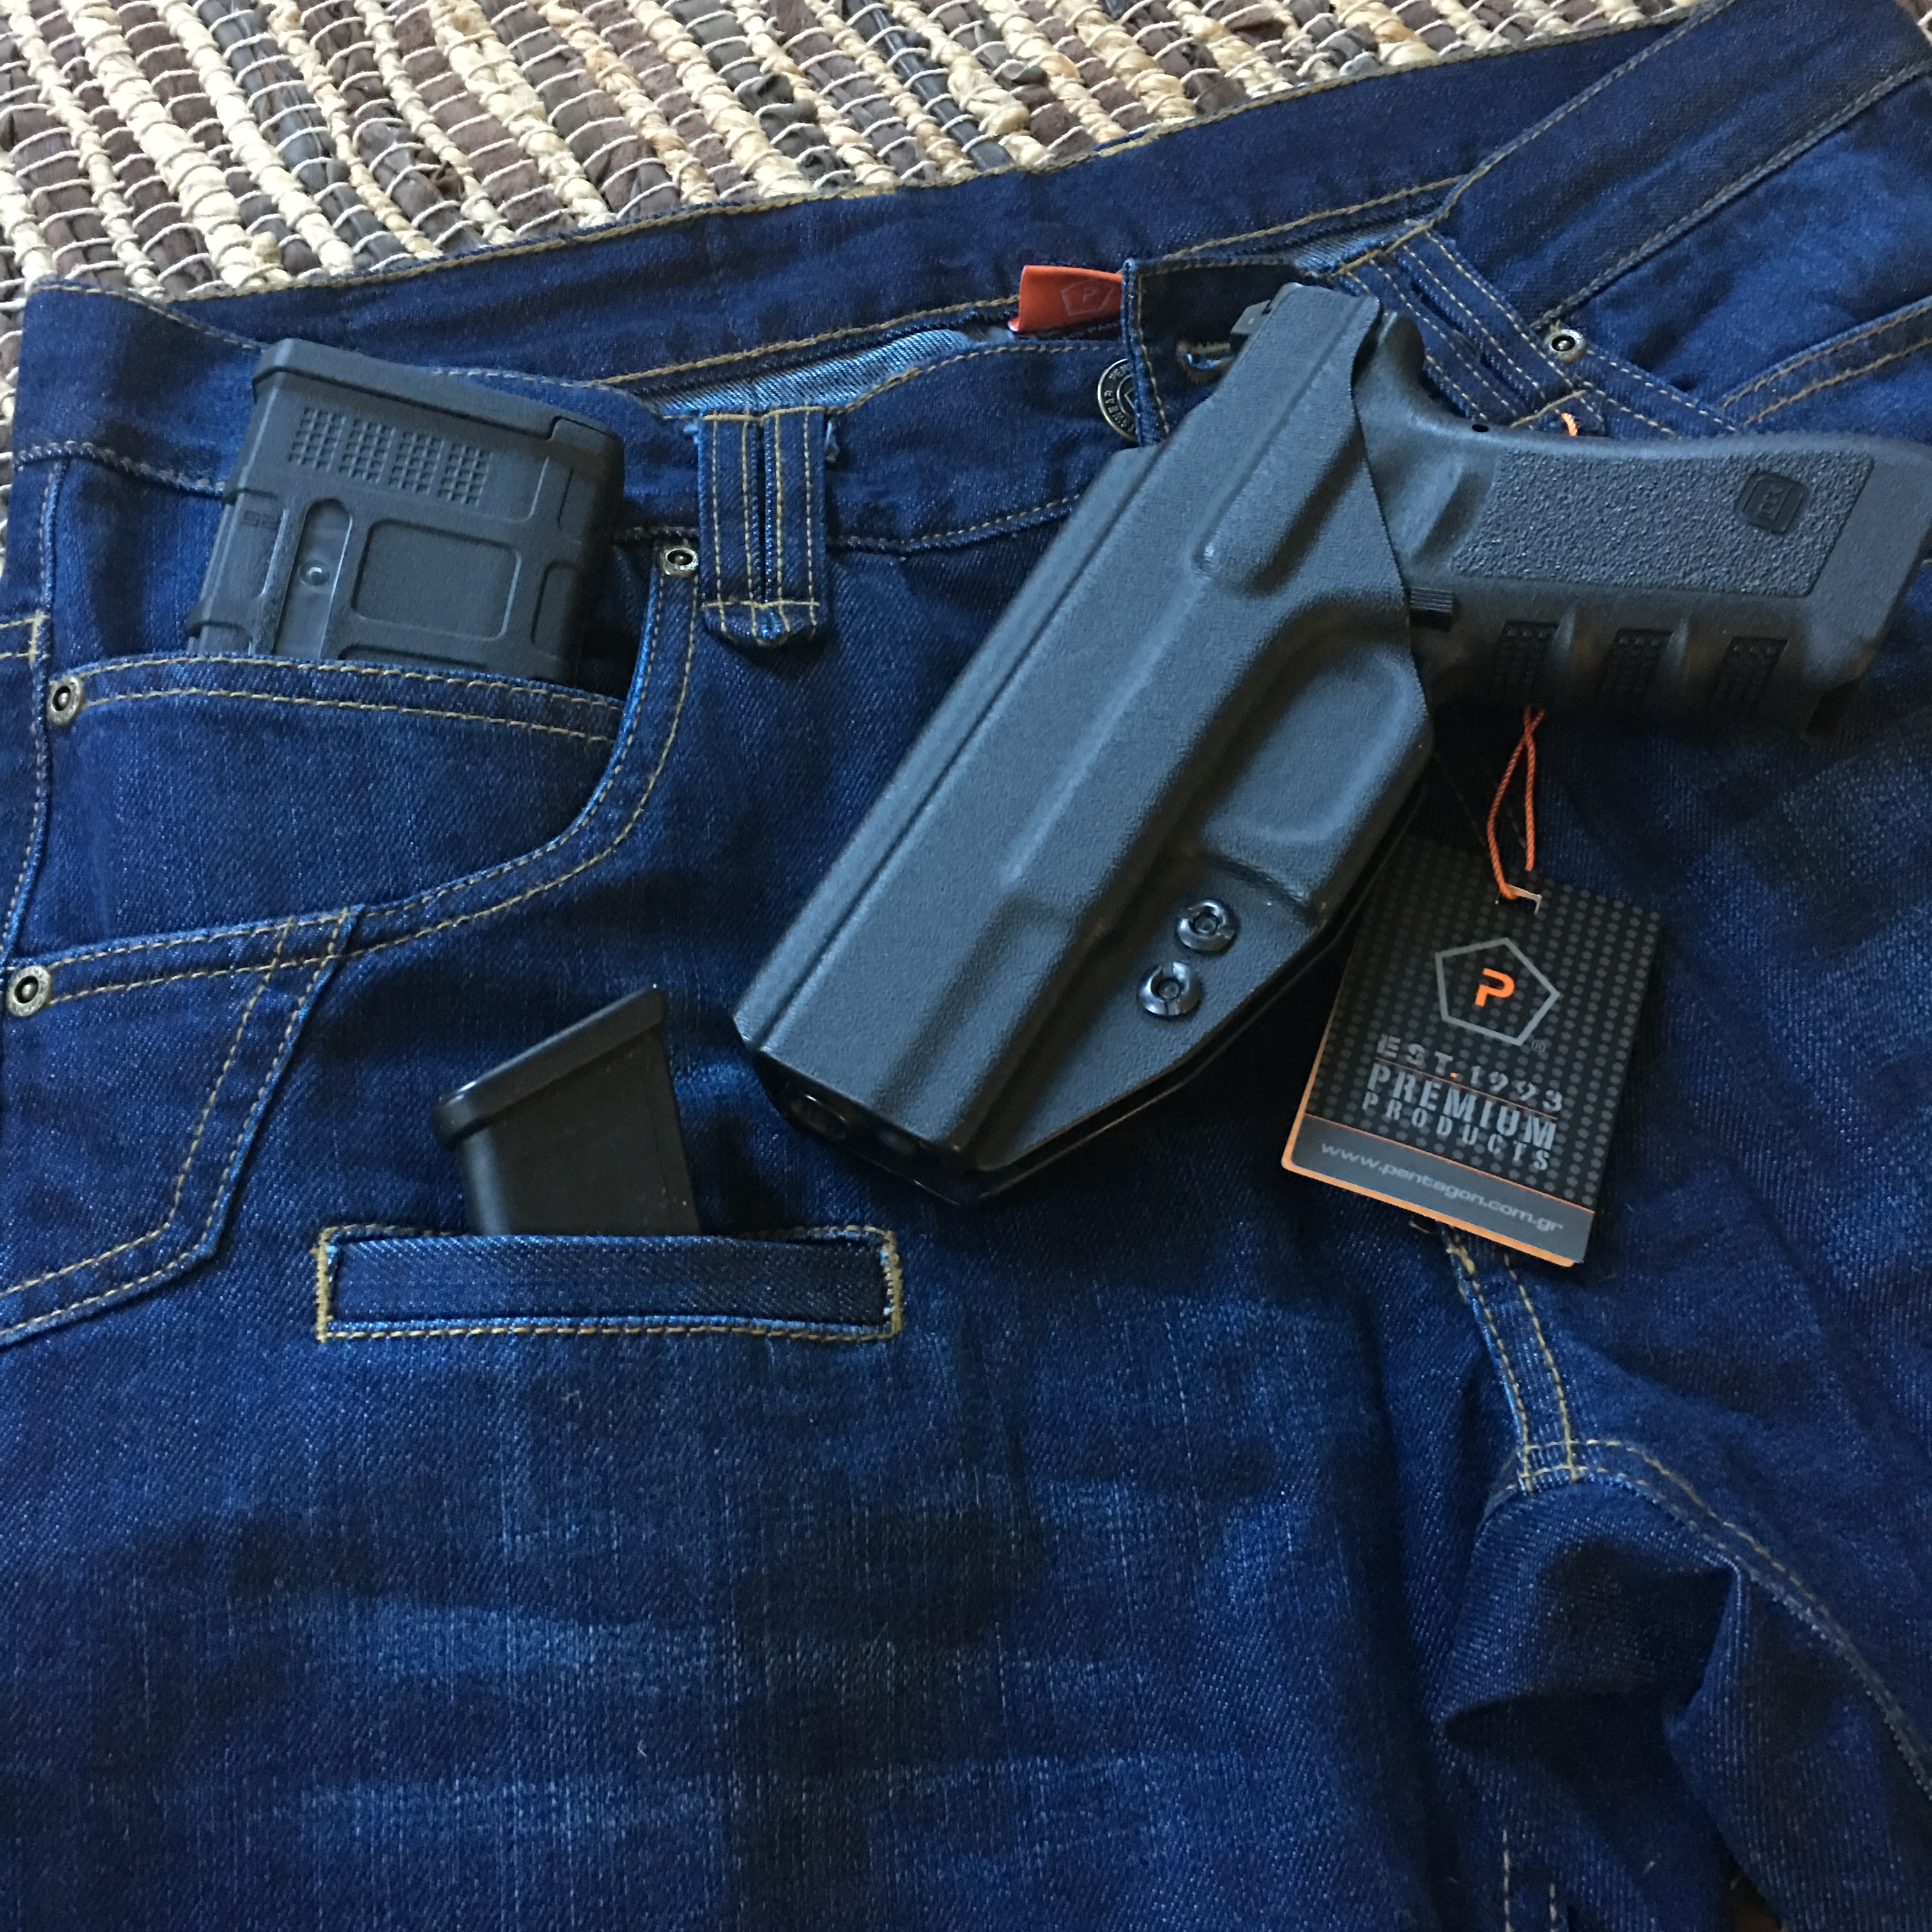 Sur oeste Golpeteo Ánimo Pentagon Rogue Tactical Jeans in Indigo Blue for Every Day Carry (EDC) •  Spotter Up